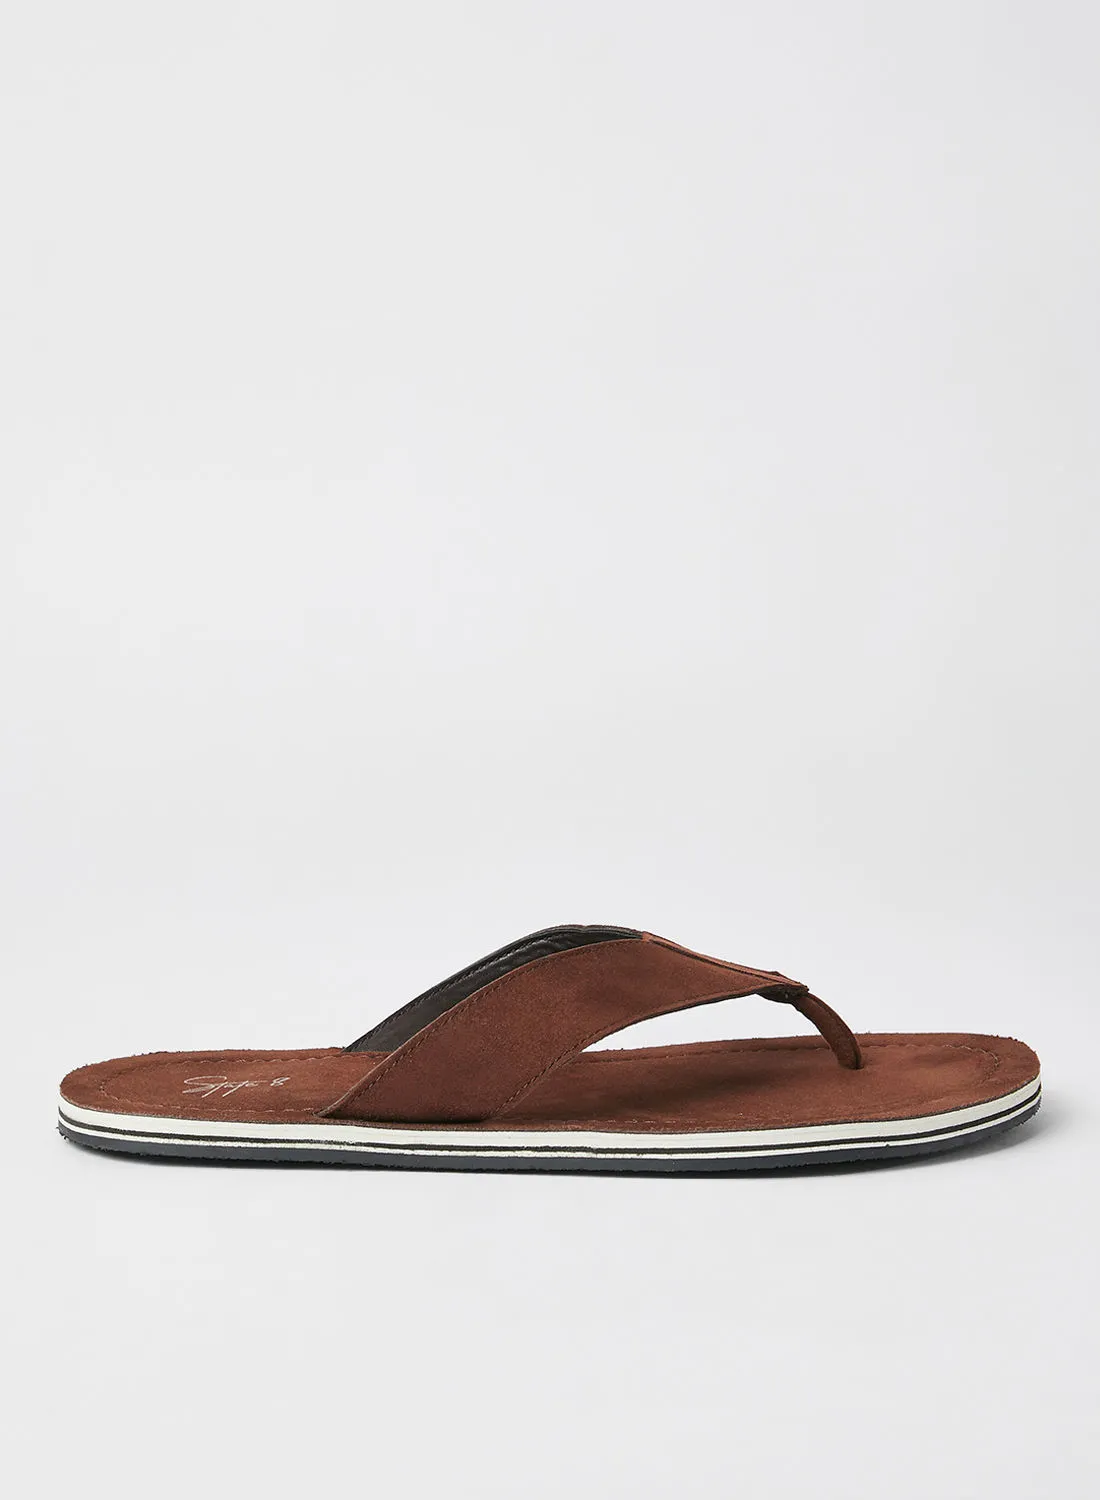 STATE 8 Strappy Flat Sandals Brown